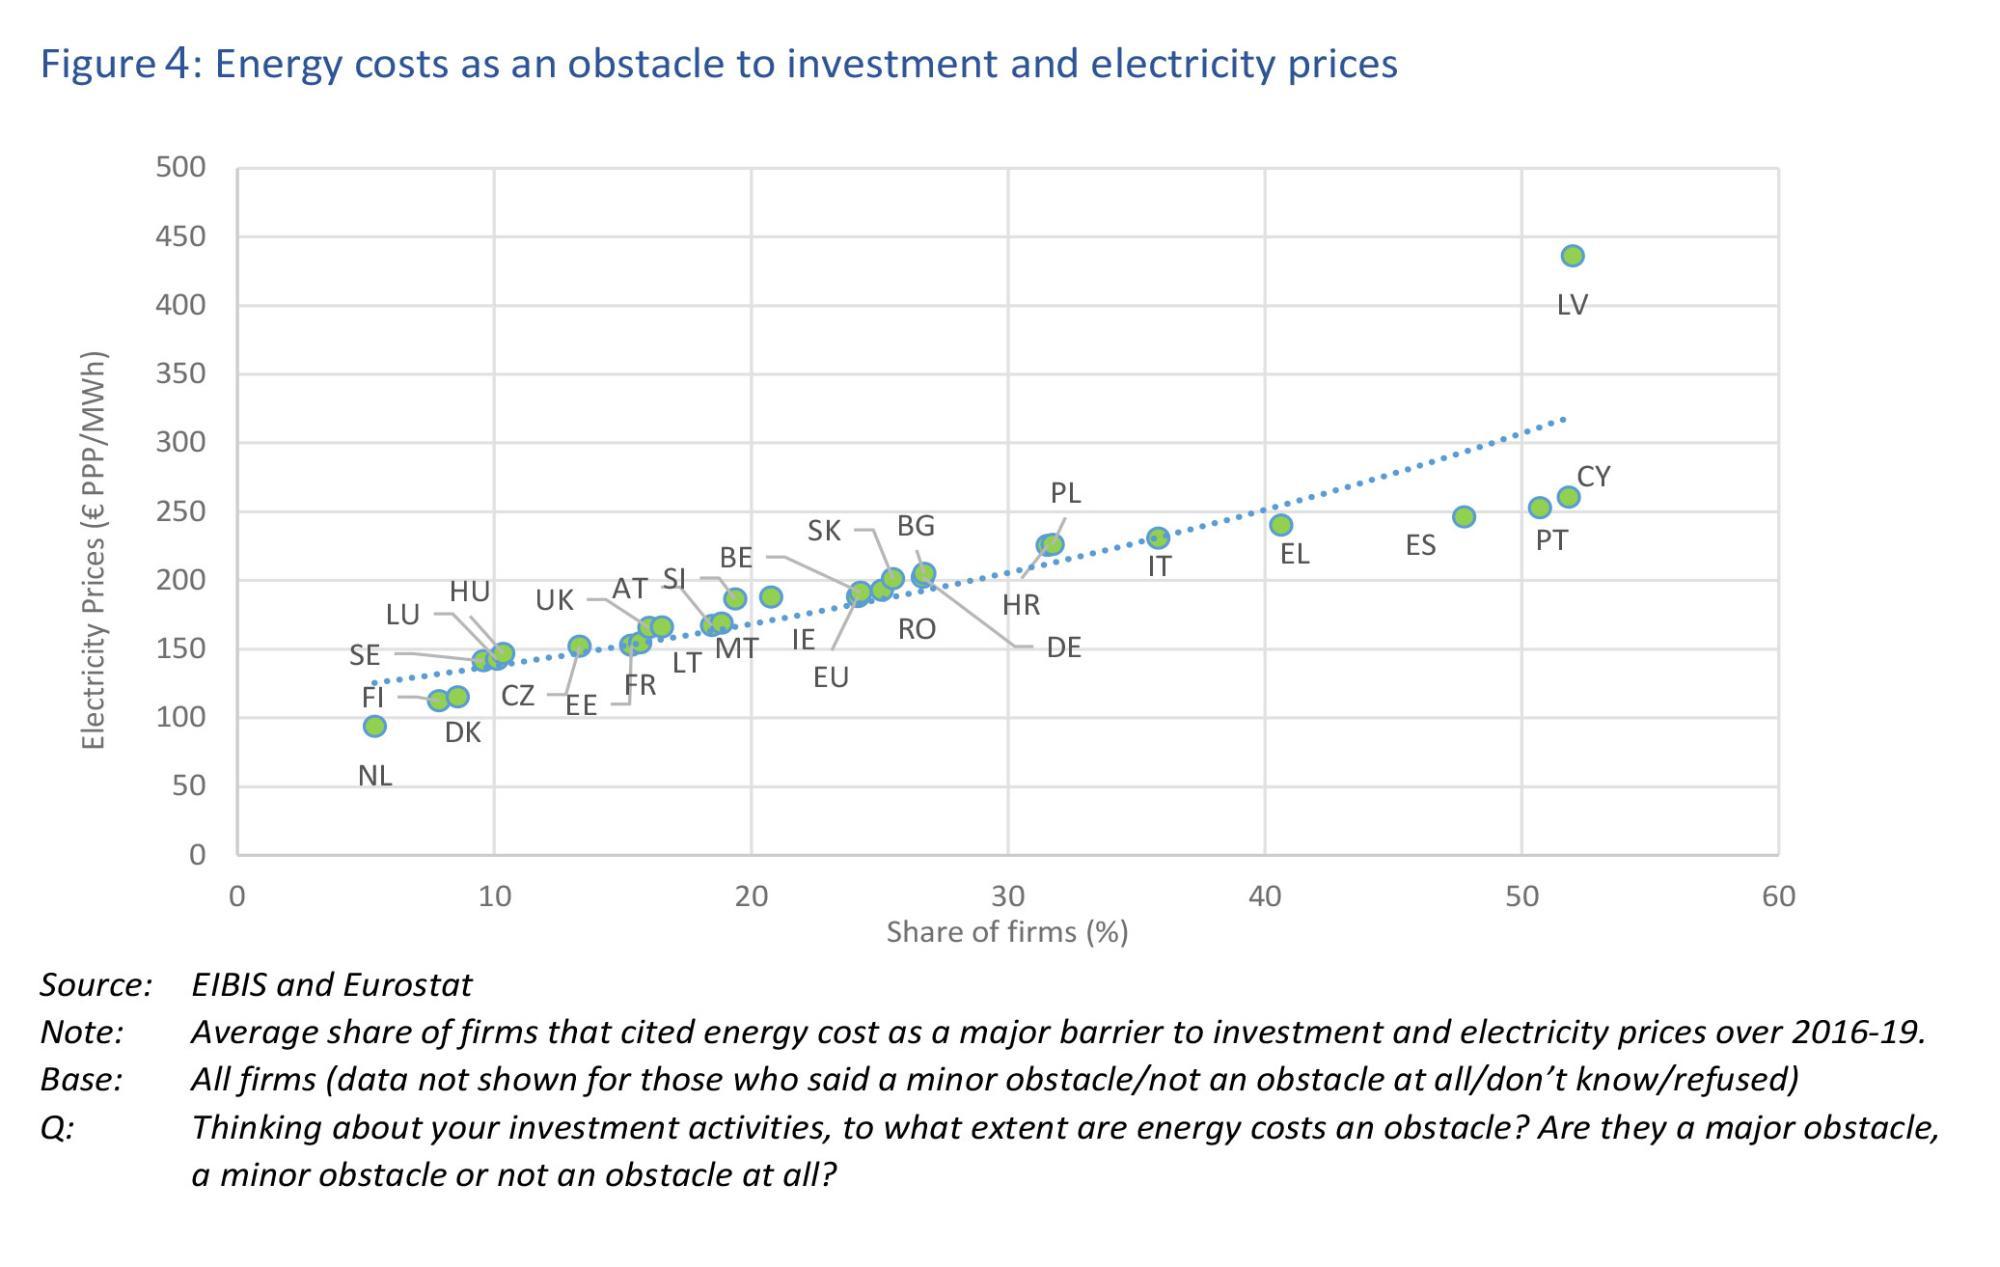  Energy costs as an obstacle to investment and electricity prices